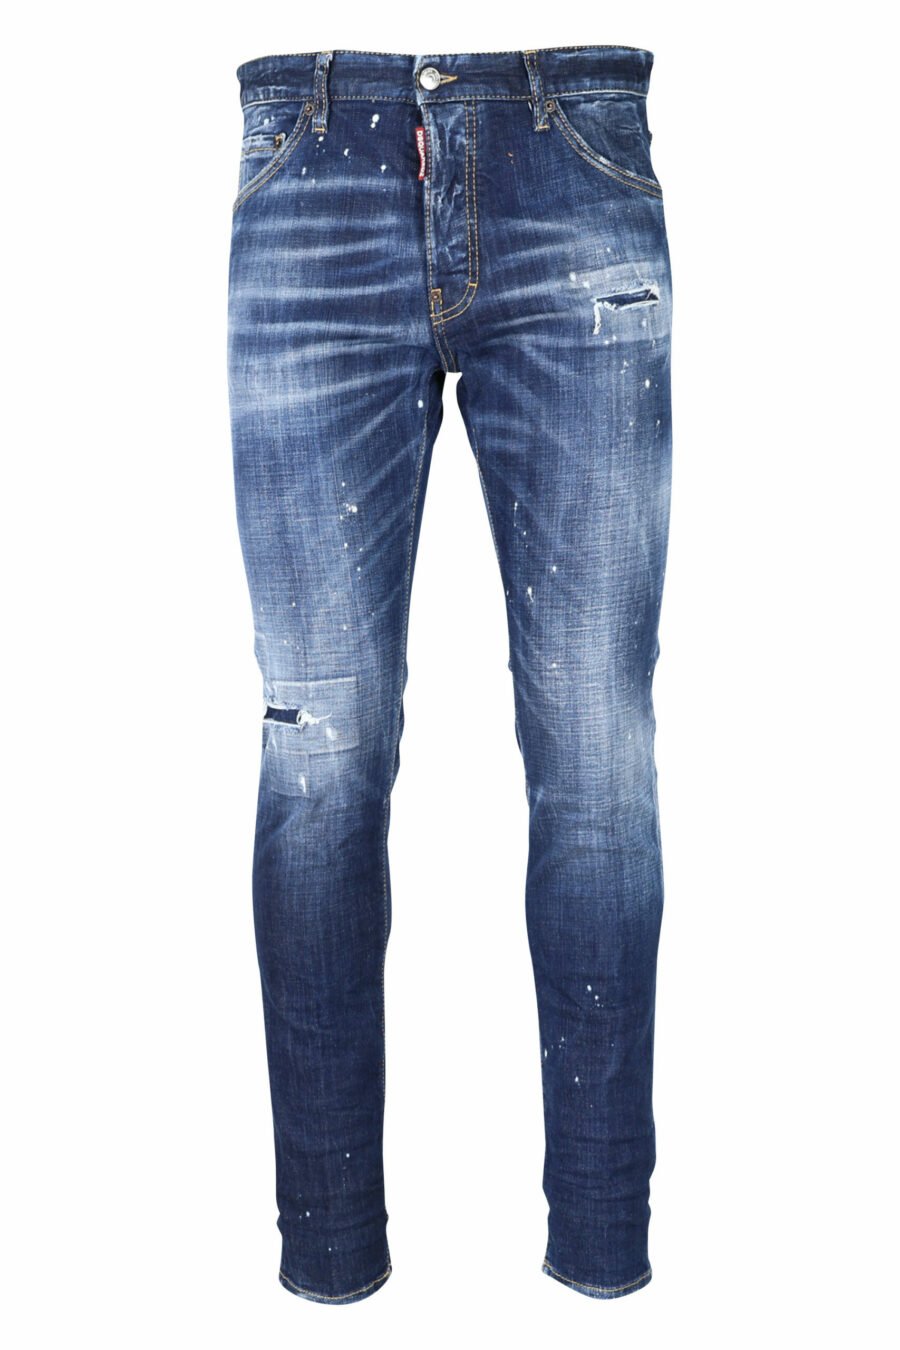 Blue "cool guy jean" jeans with paint and frayed - 8054148101688 scaled